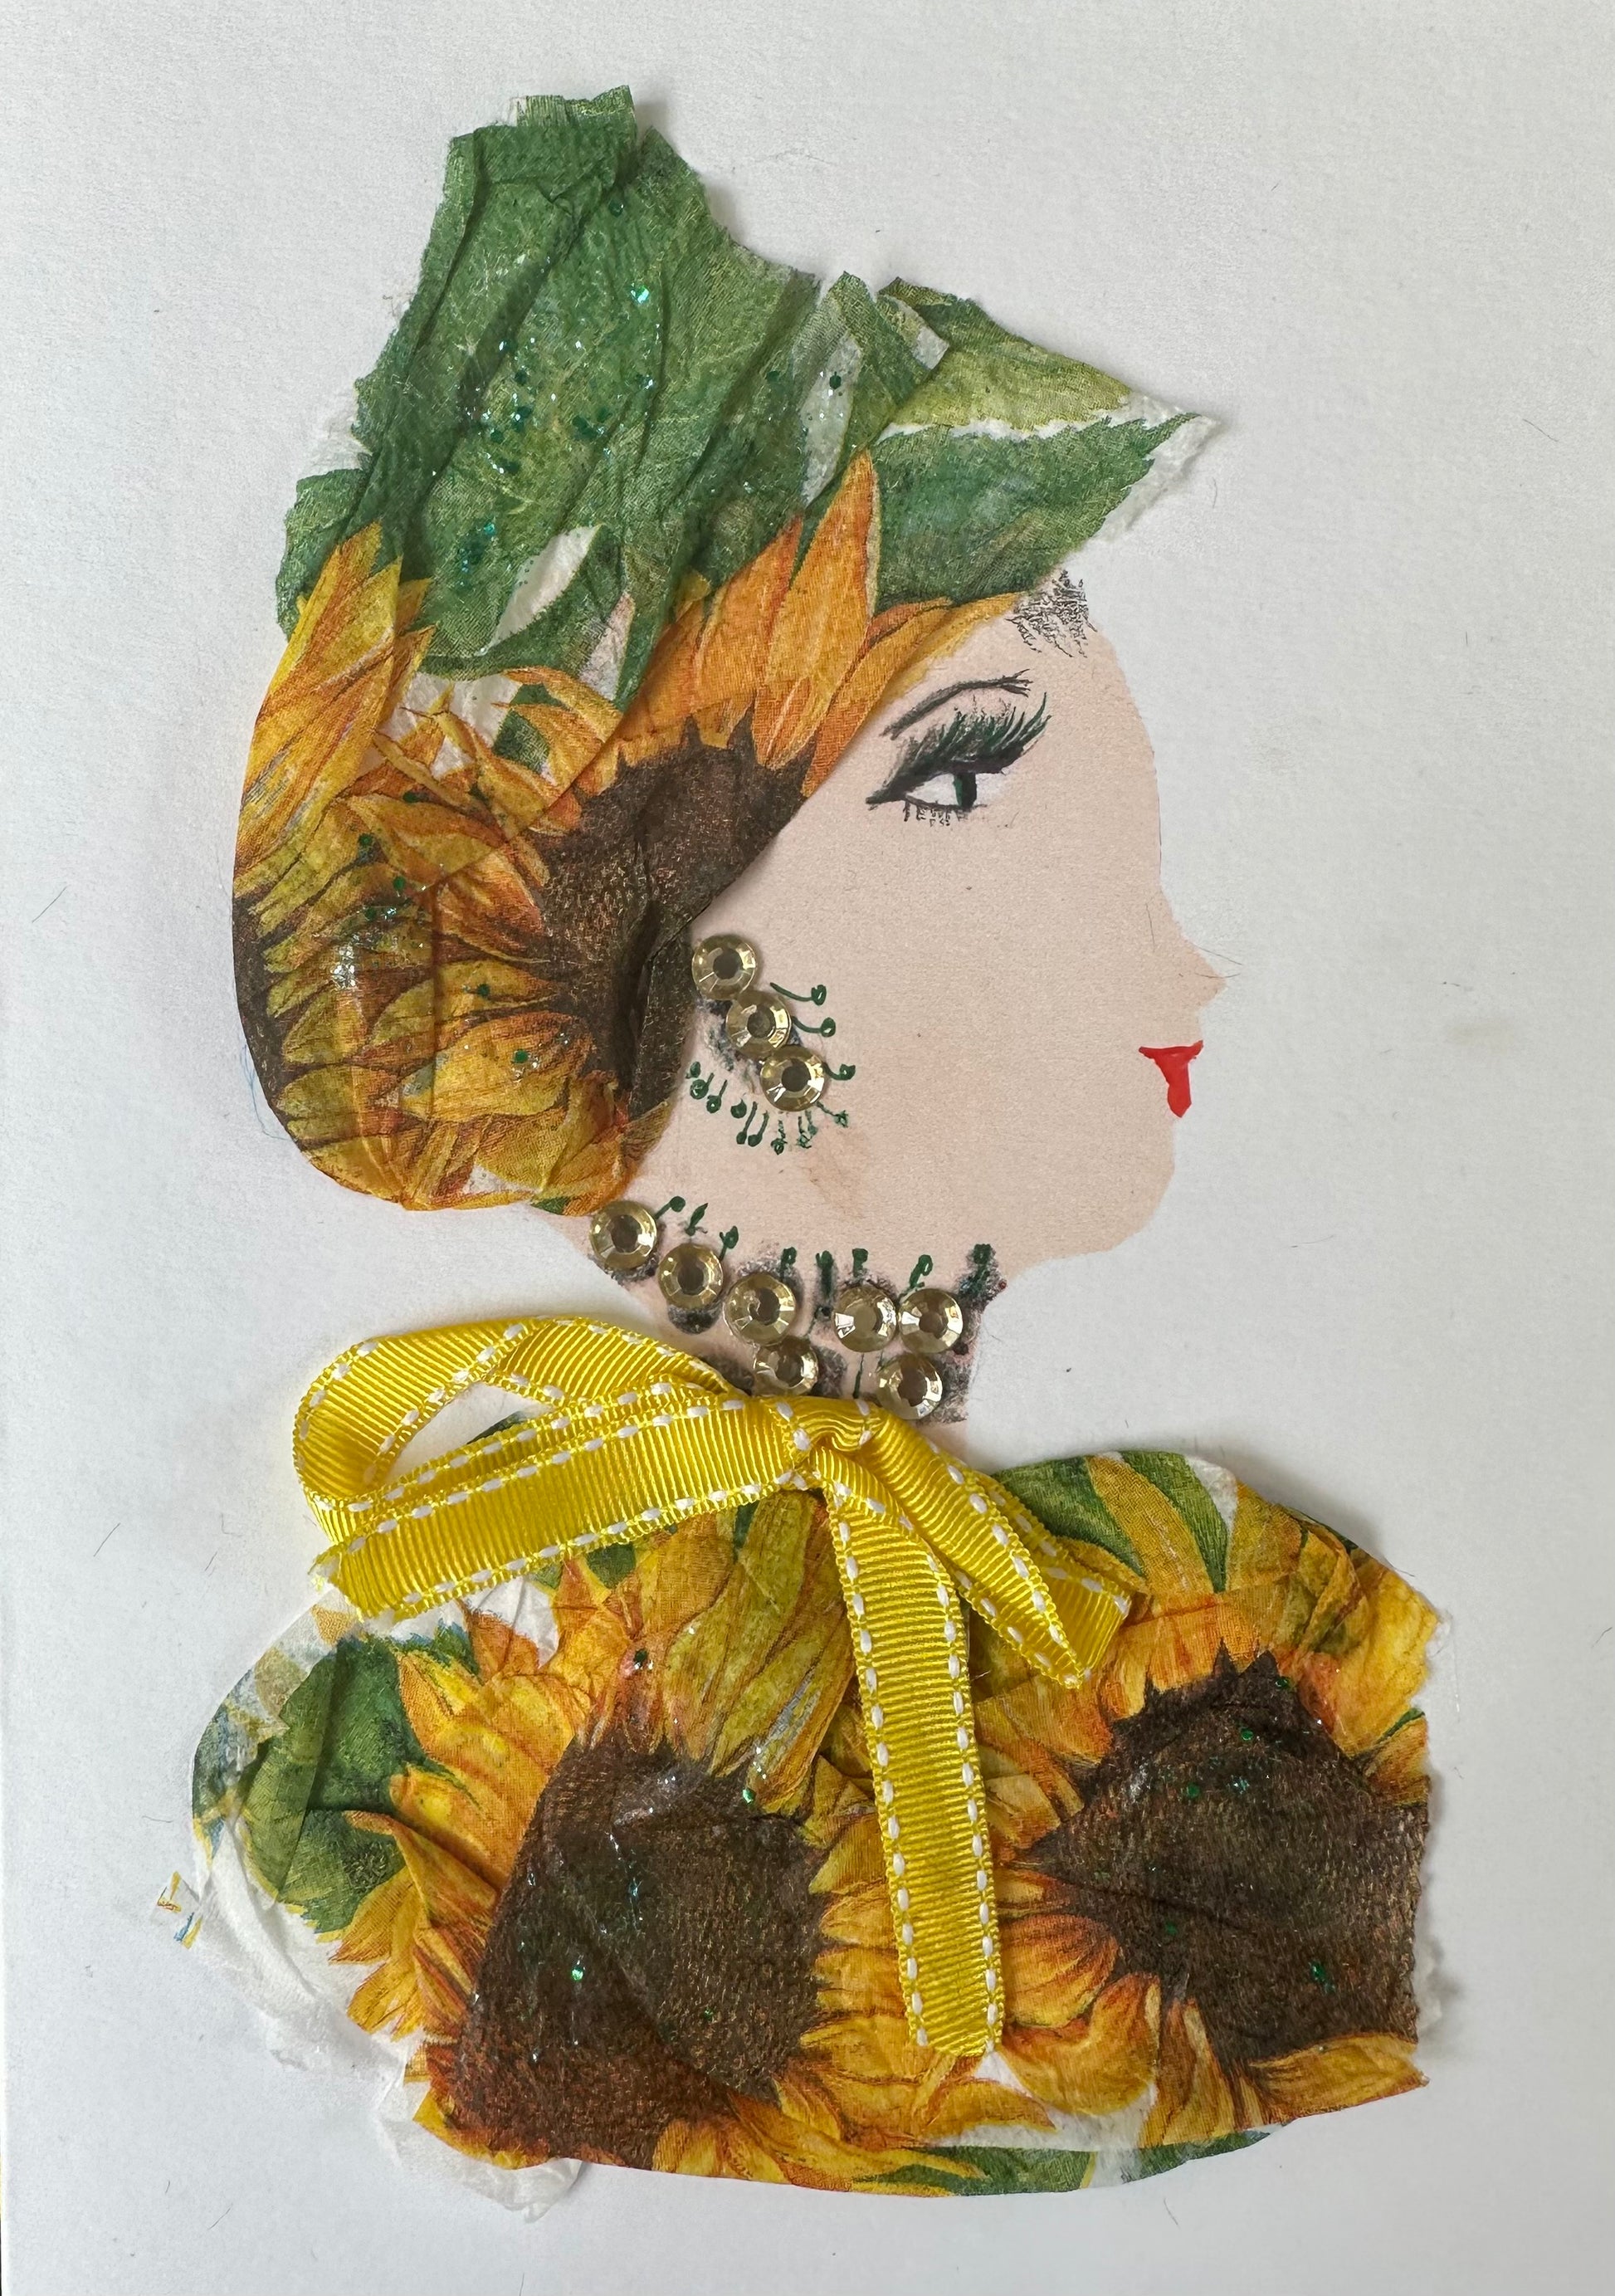 I designed this handmade card of a woman dressed in a sunflower patterned blouse and hatinator. The blouse has a yellow bow around the collar, and her jewellery is silver gemstones.